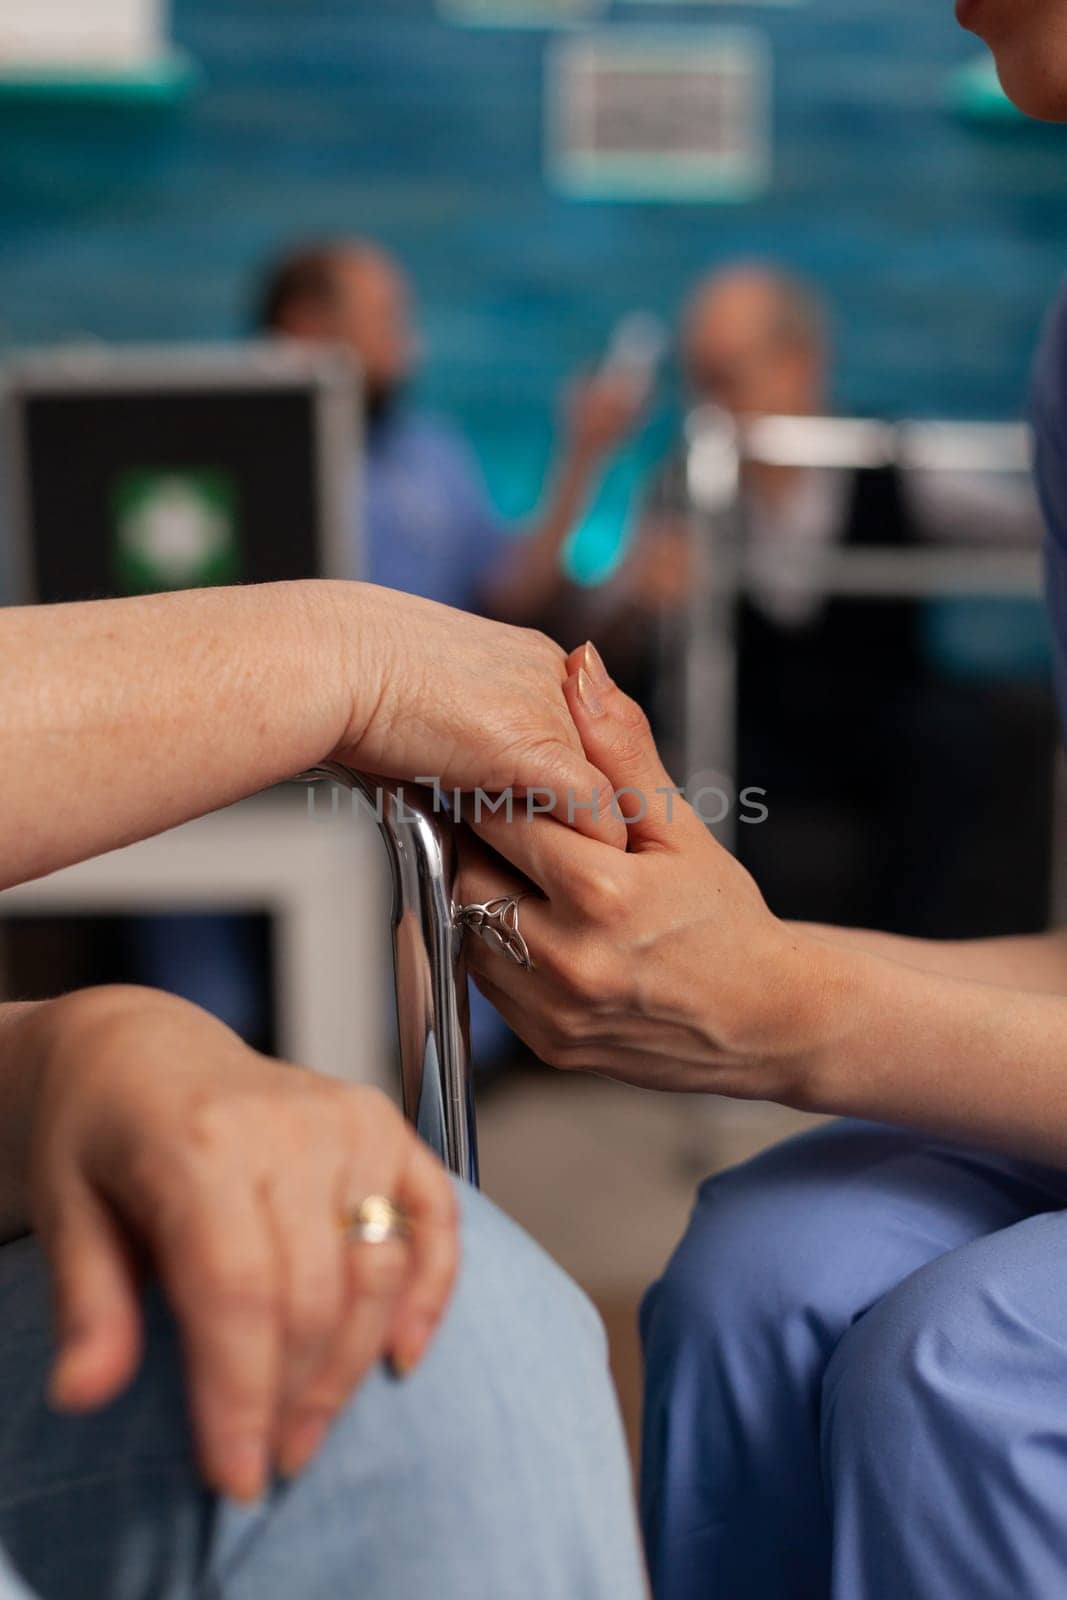 Nurse holding hand of an elderly patient in wheelchair, giving support and motivation in difficult moments. Professional nurses specialized in nursing home care for seniors.